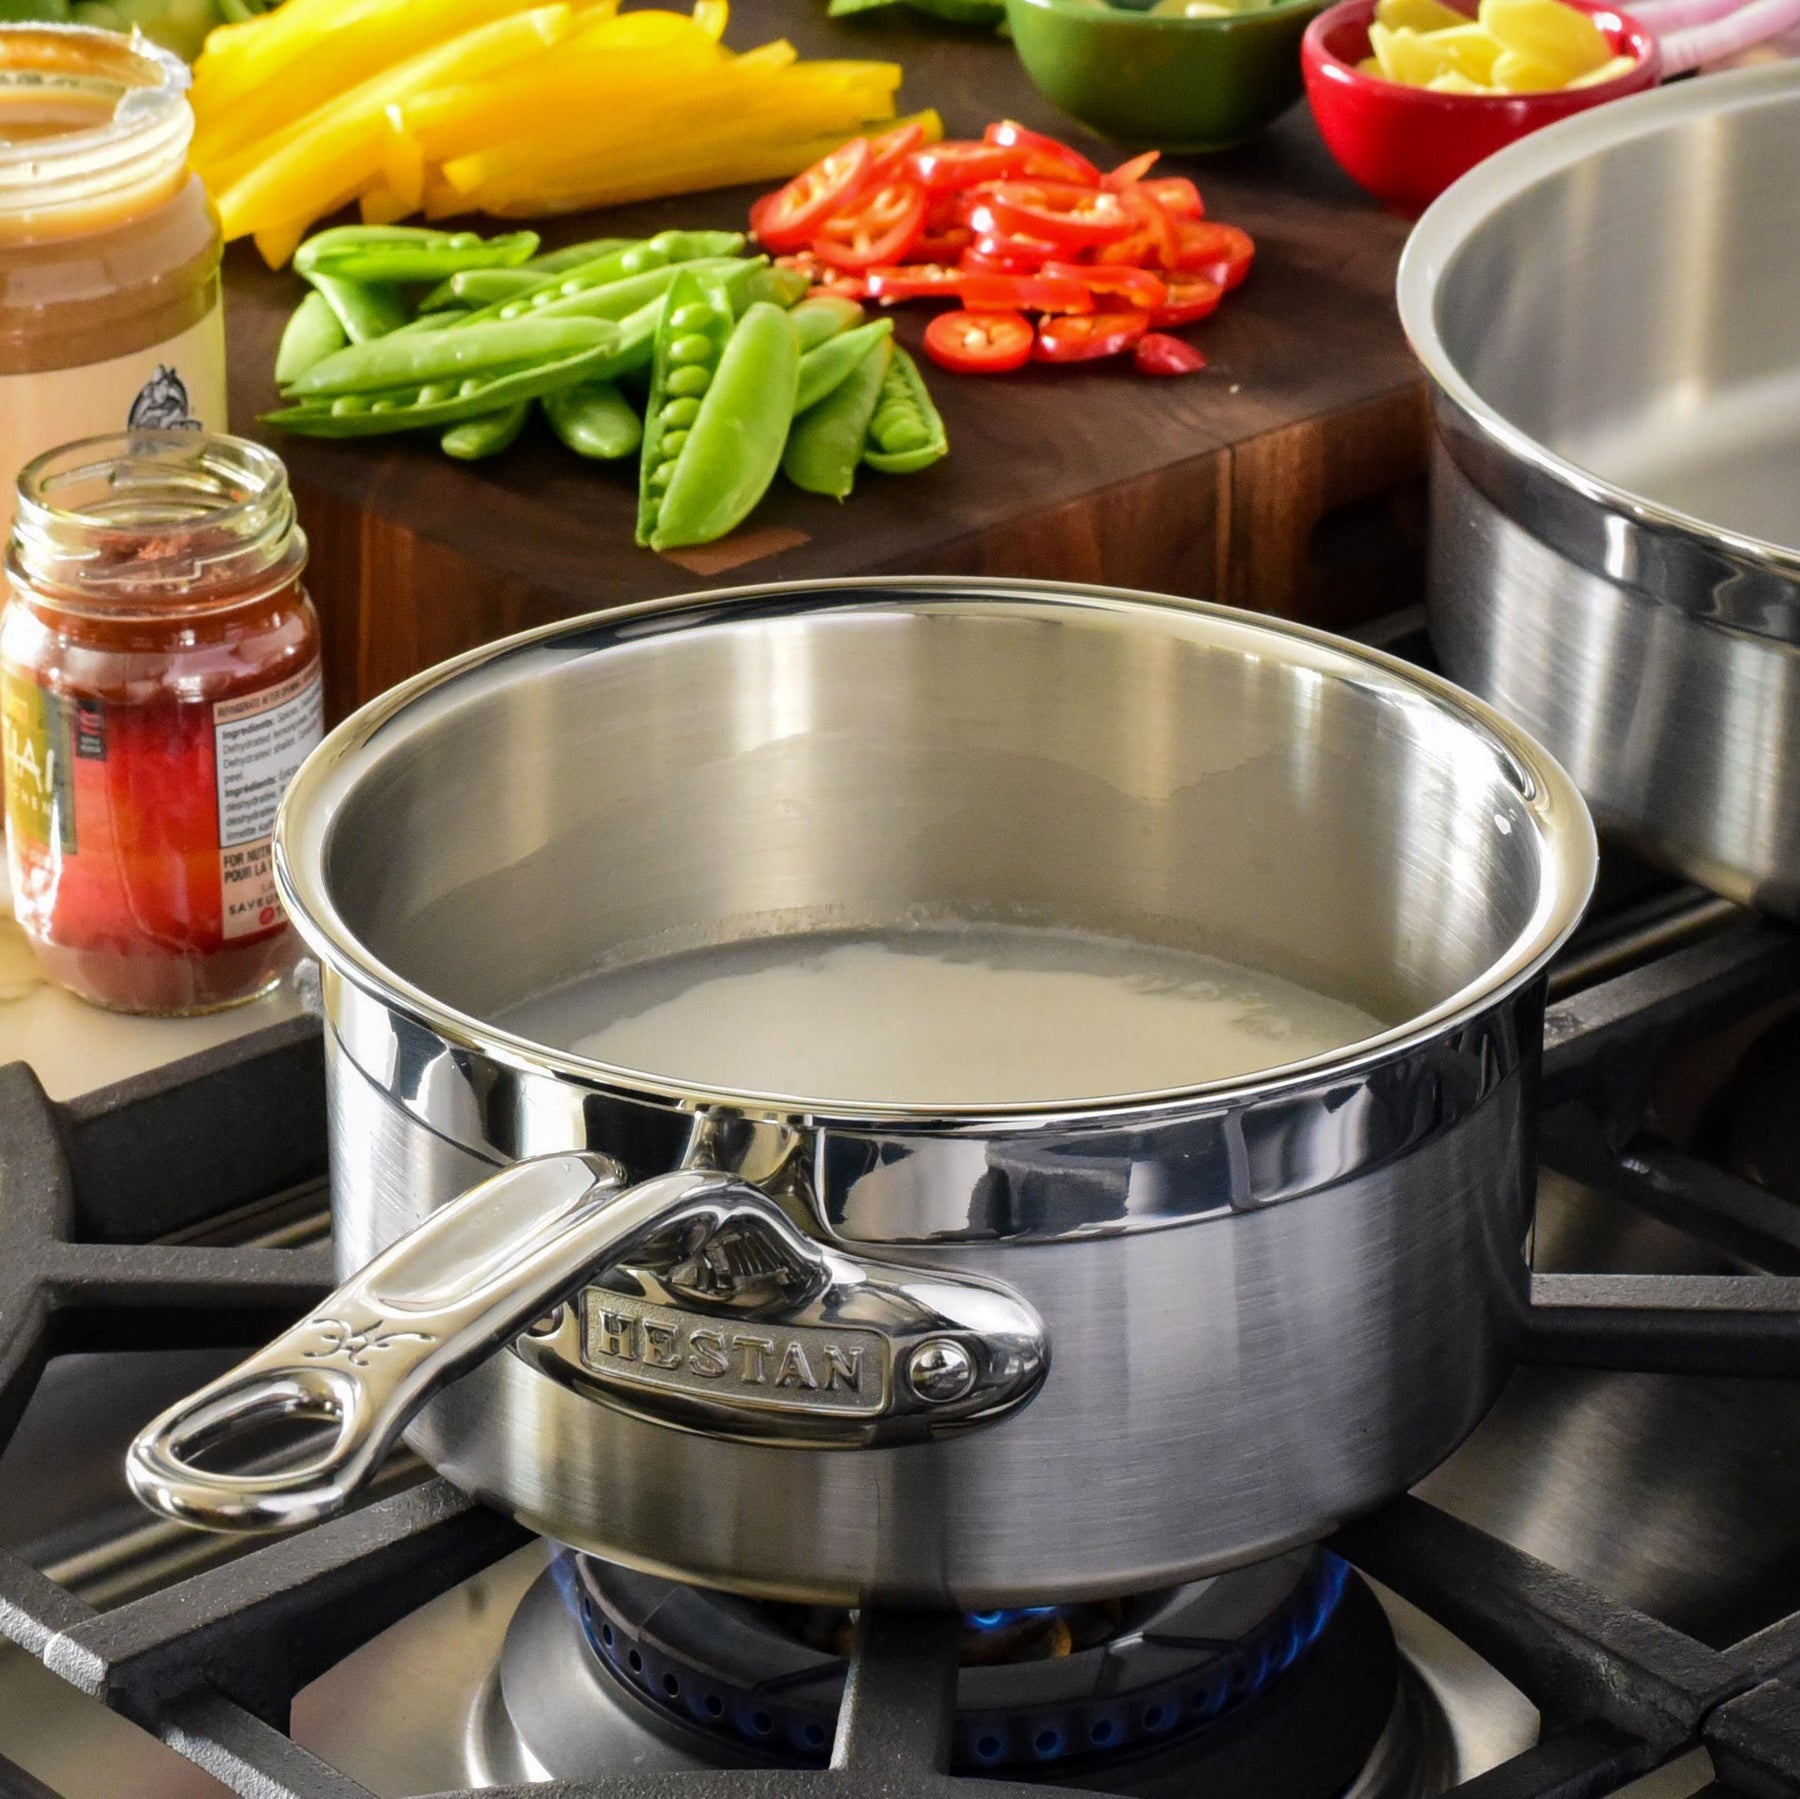 Hestan Induction Clad Stainless Steel Saucepan & Lid - 2 Sizes